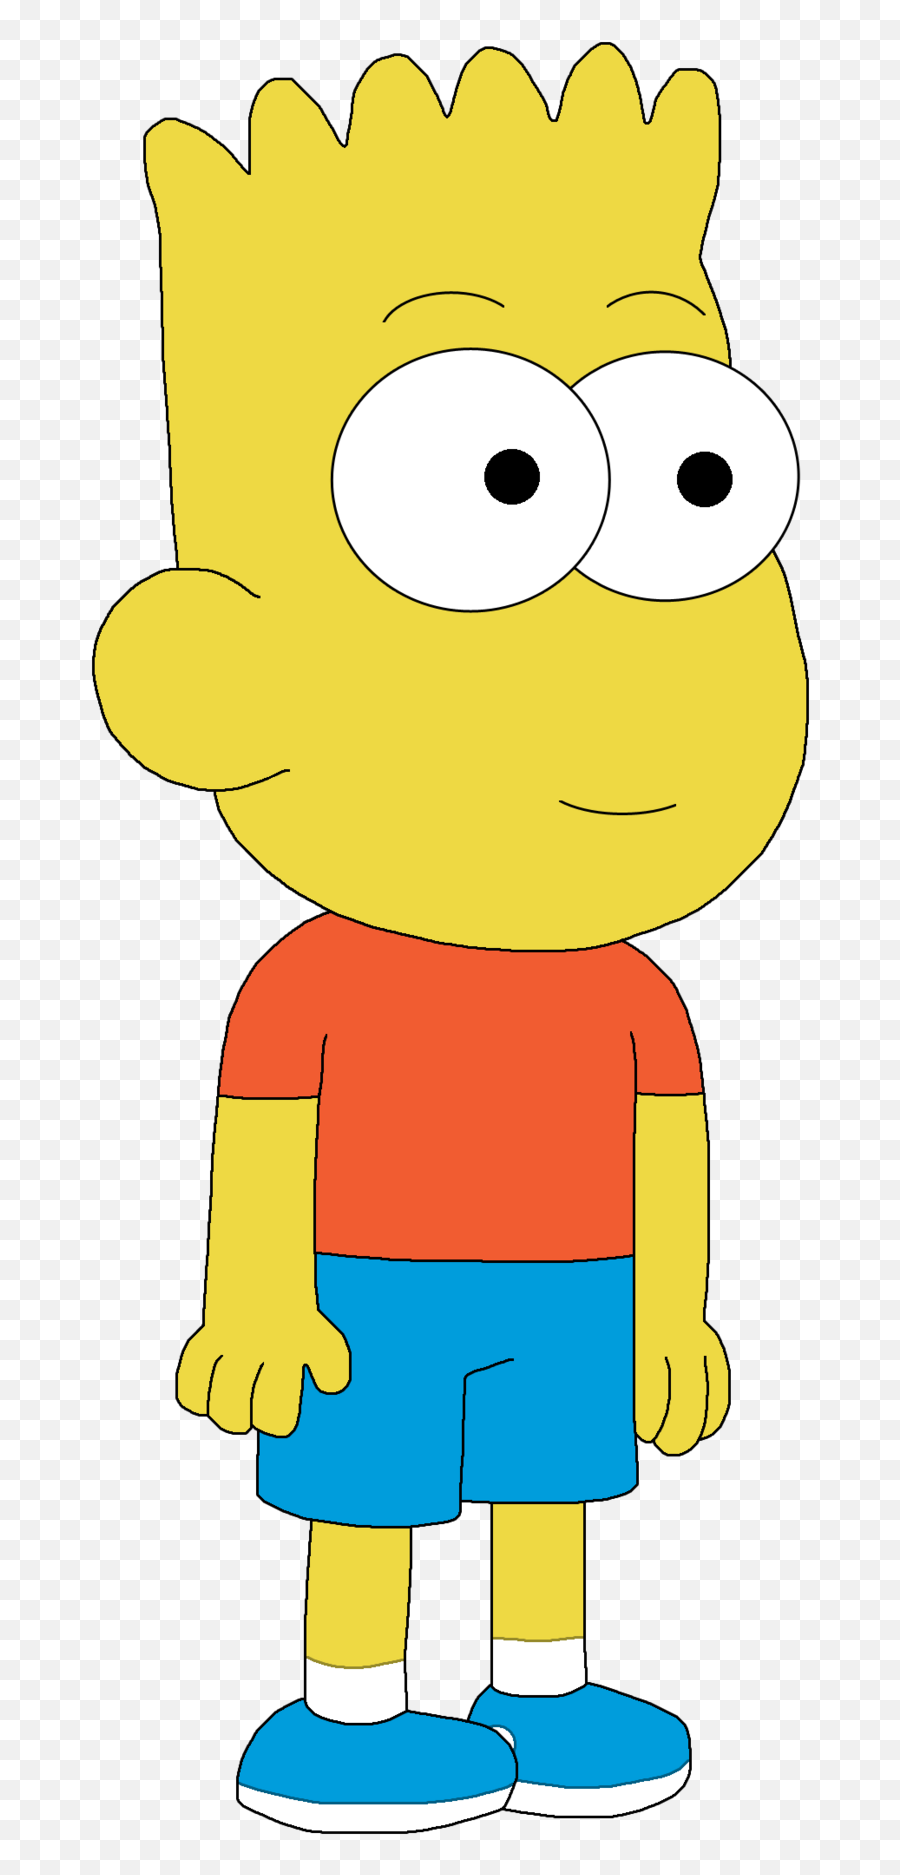 All Posts - Big City Greens A European Adventure The Movie Emoji,The Only Emotions You Feel When Bart Meme